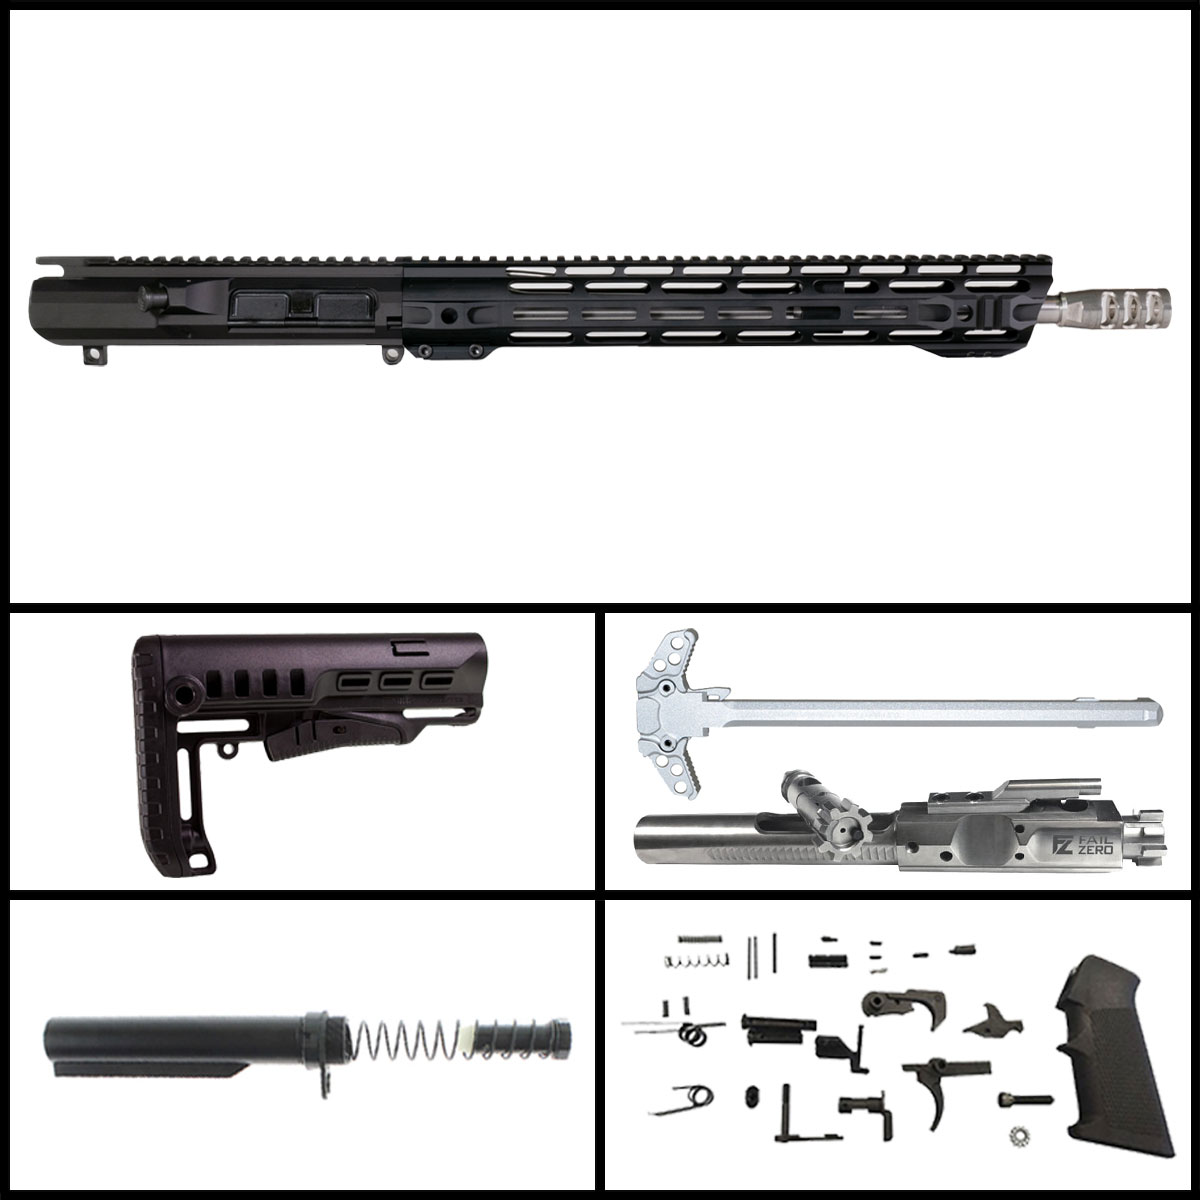 Davidson Defense 'Swiftwind' 16-inch LR-308 .308 Win Stainless Rifle Full Build Kit